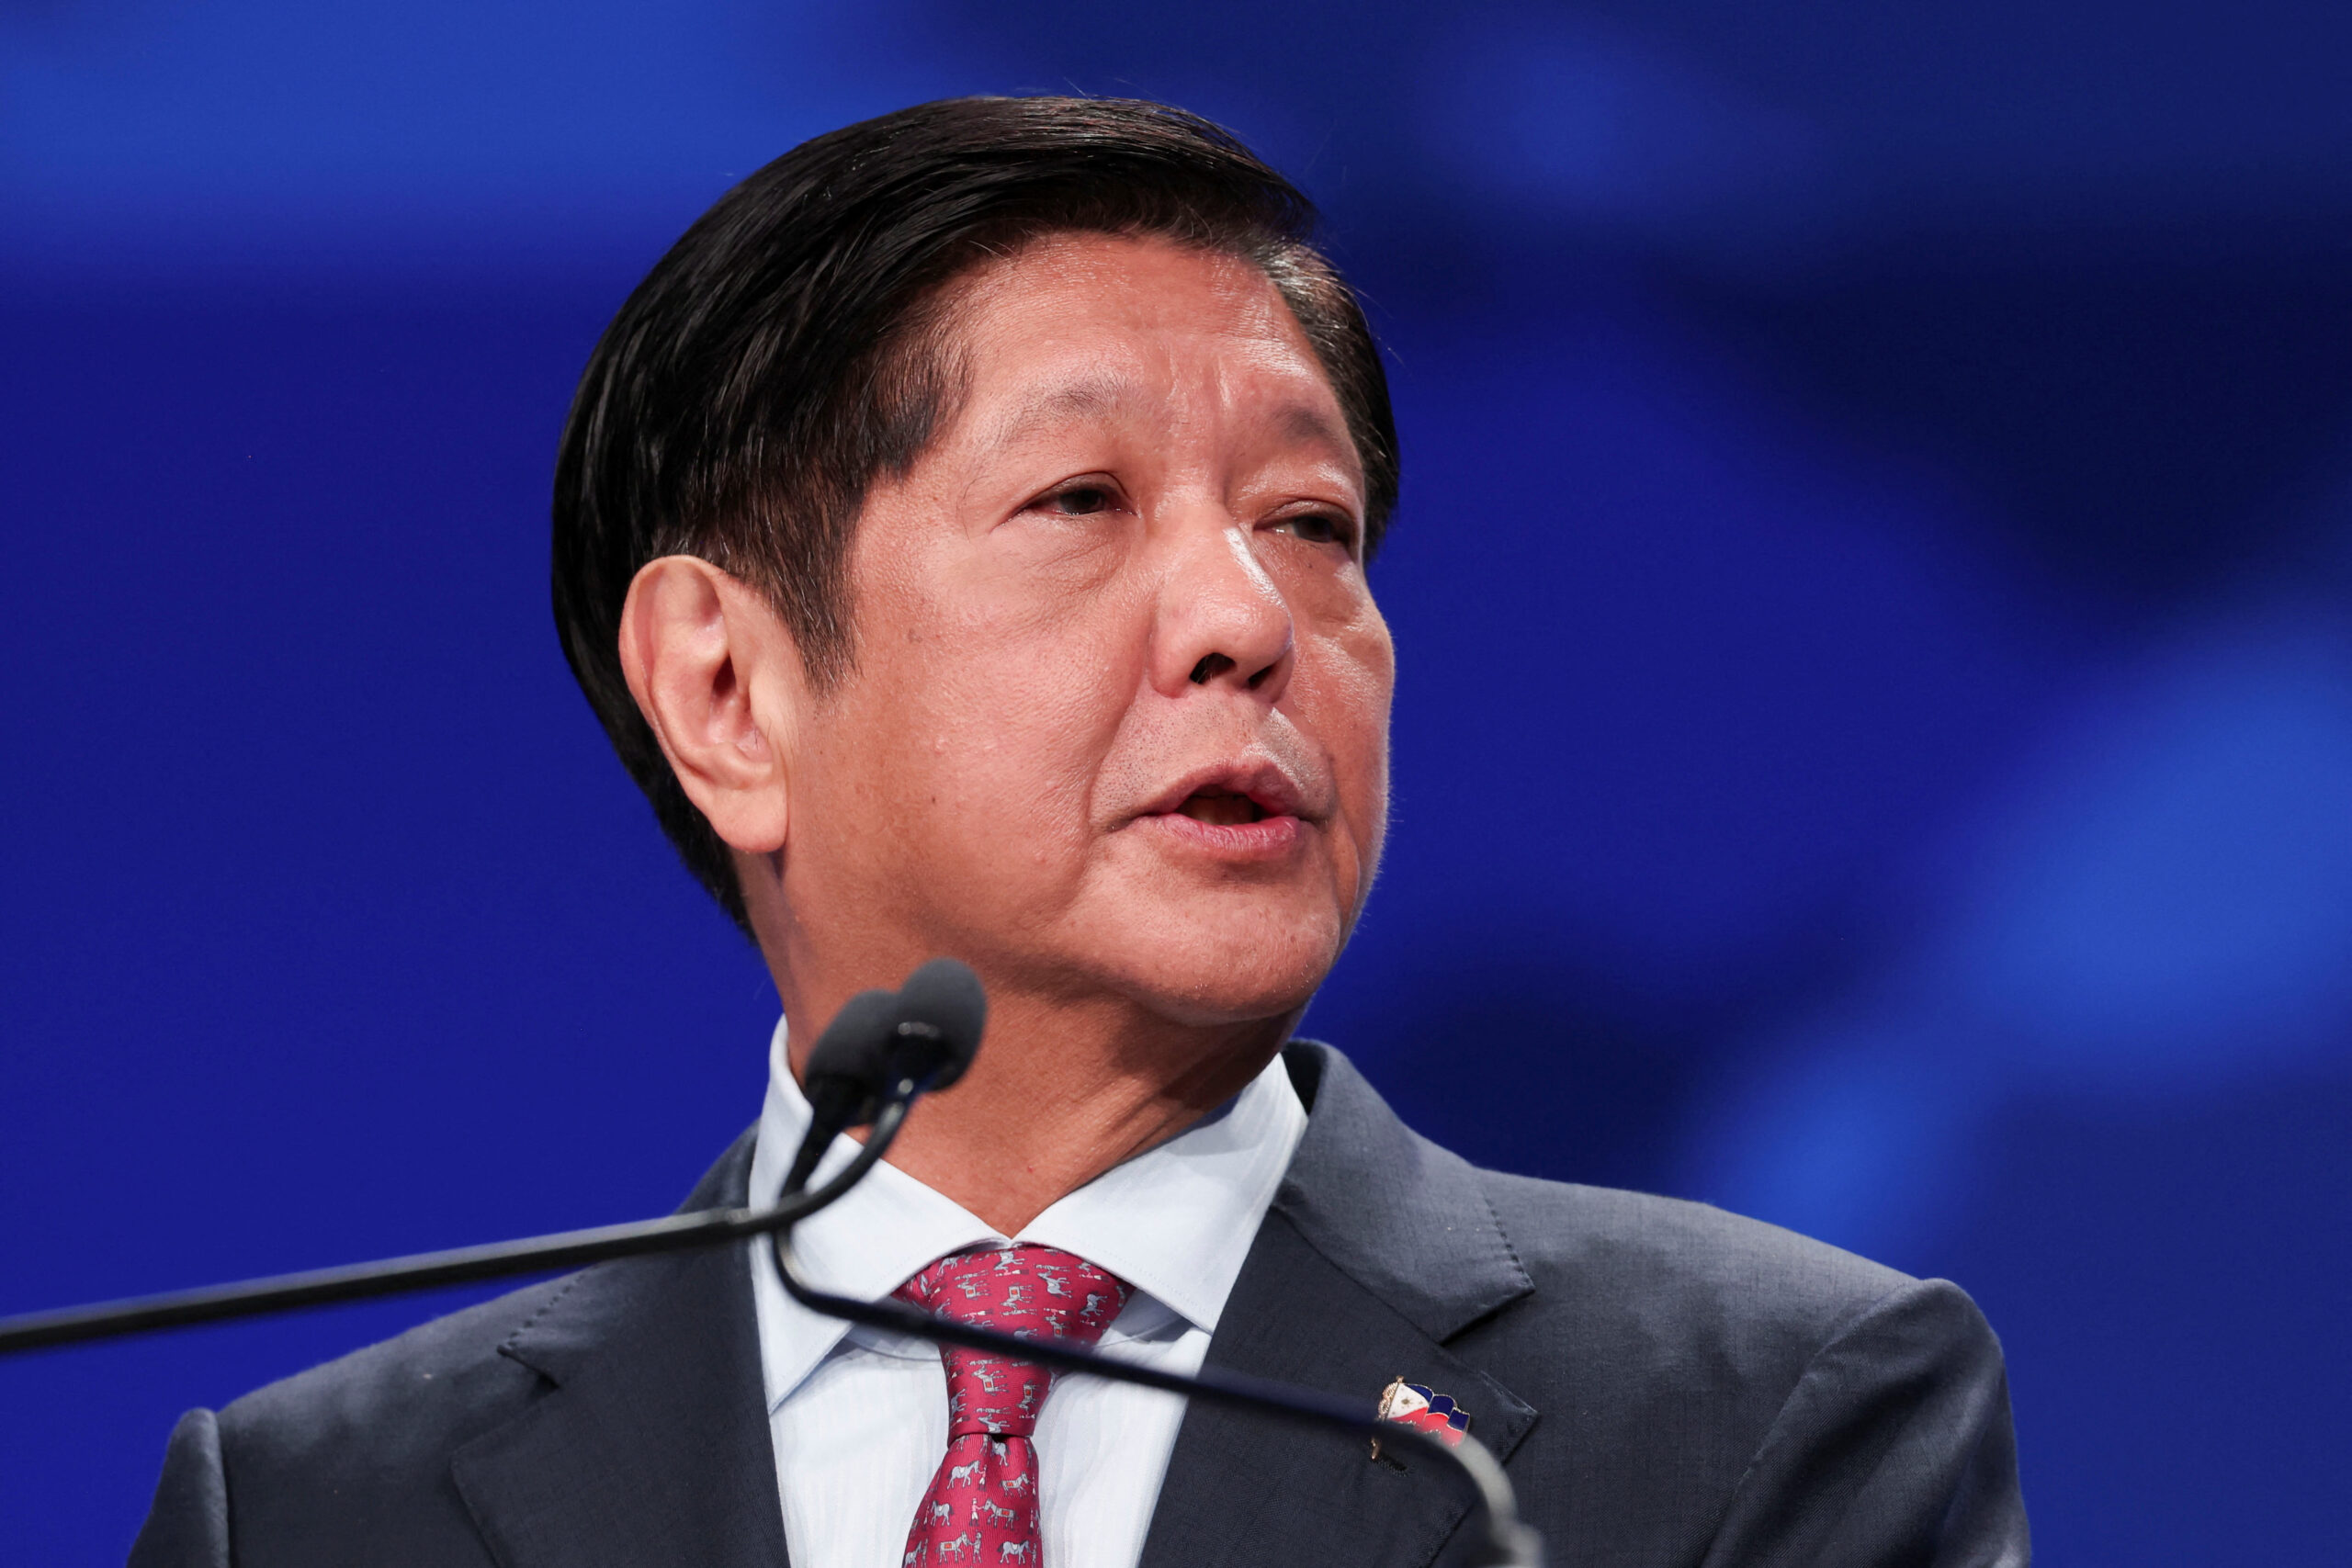 Marcos to tackle trade, labor, energy, climate change in Germany visit